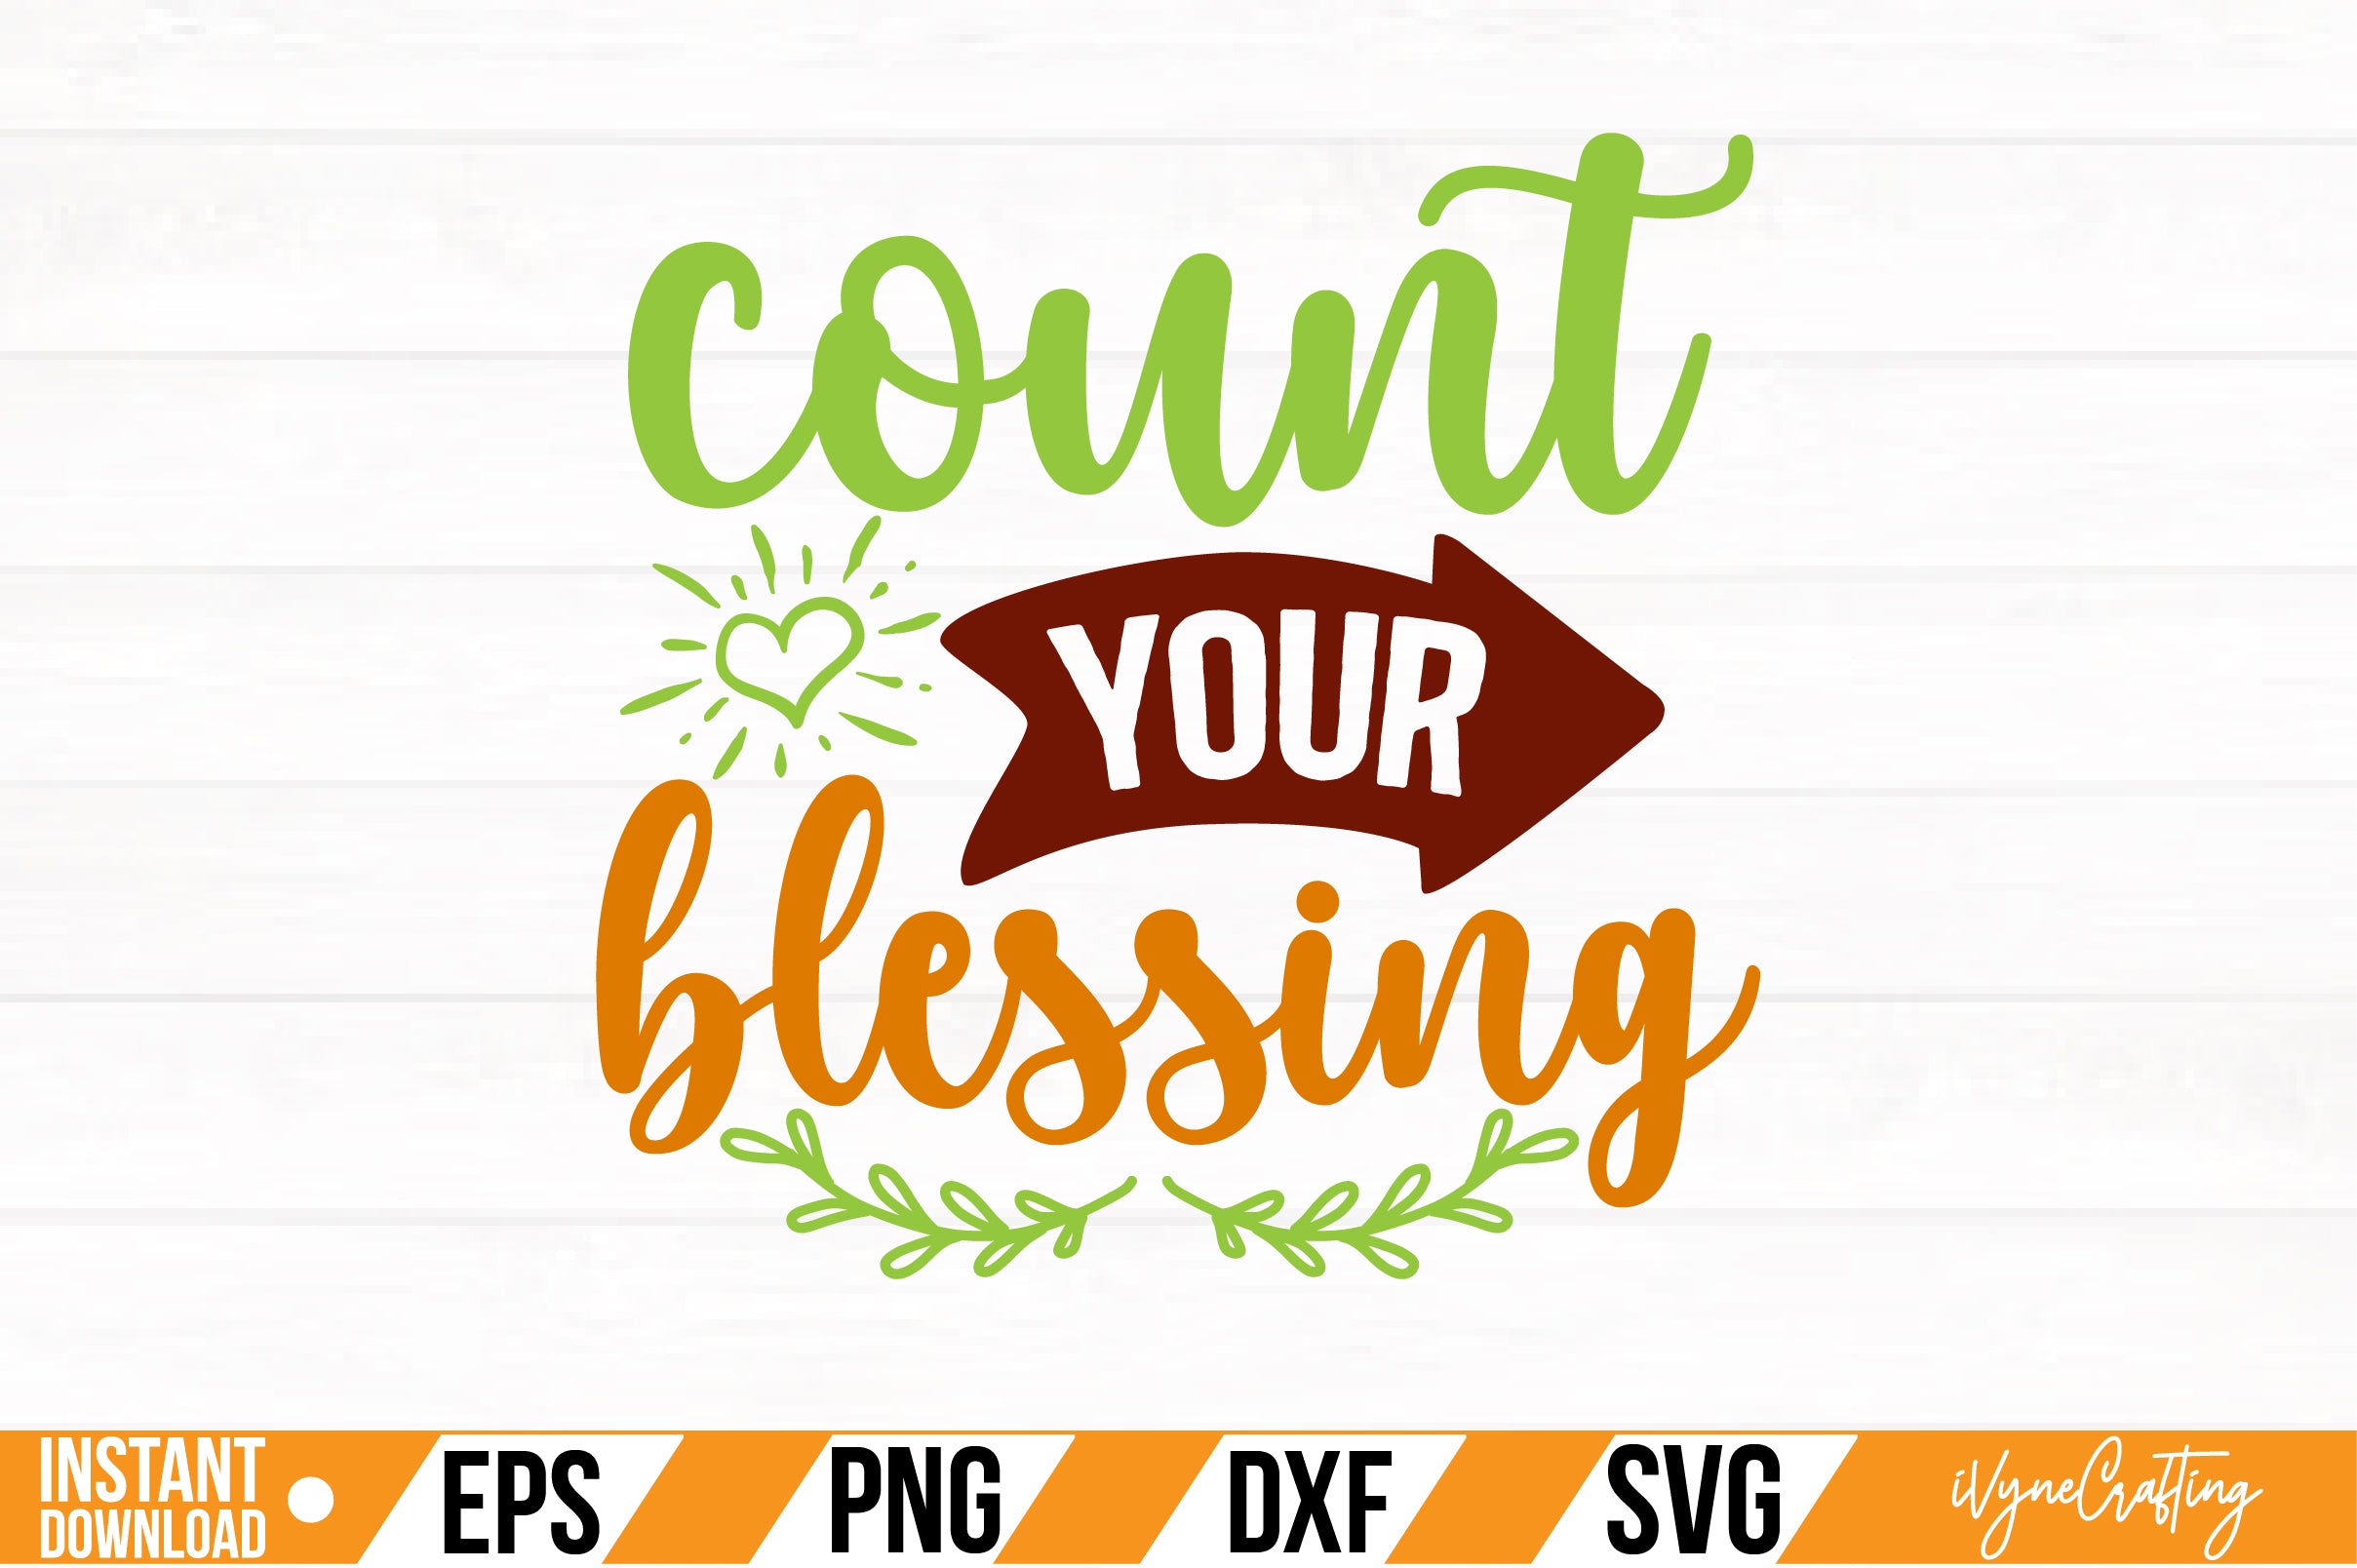 count your blessing SVG Cut File